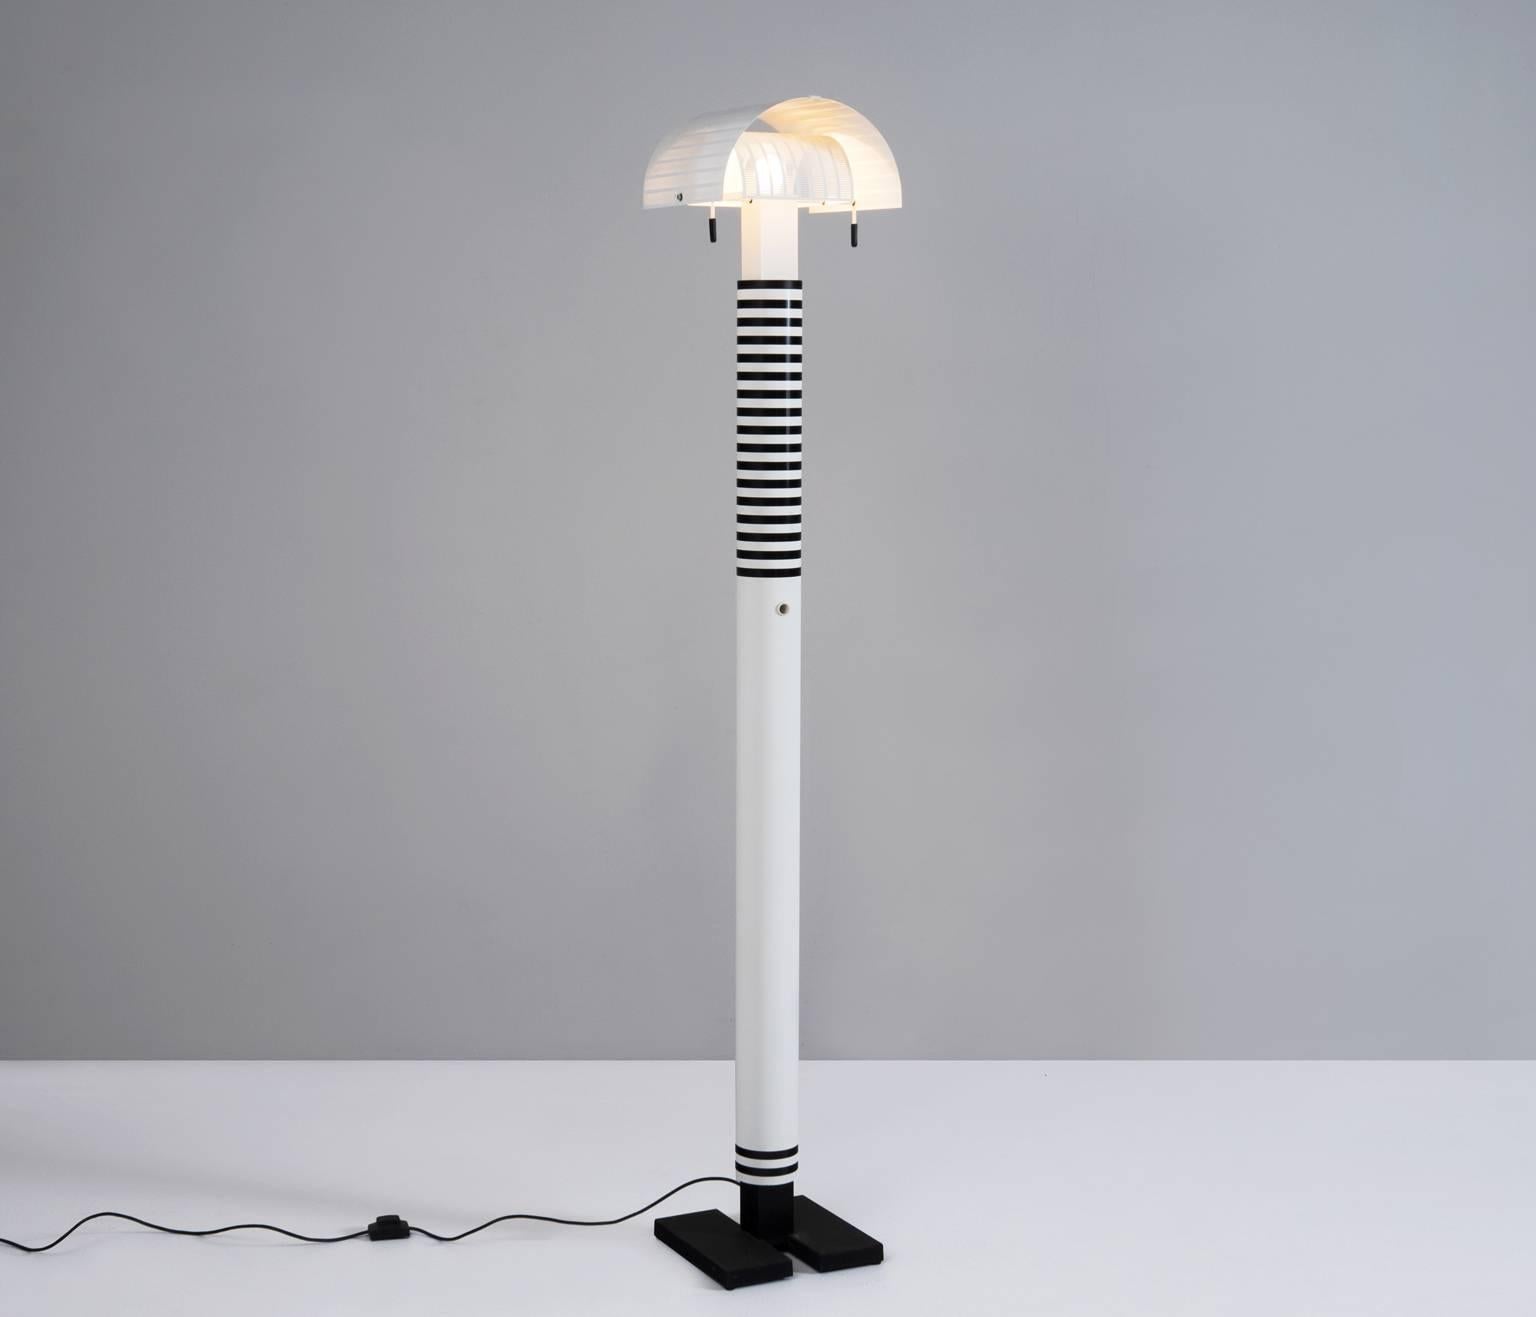 Italian floor lamp designed by the Italian architect, Mario Botta for Artemide, 1980s.

The black base is made of cast iron, the powder coated shaft is back and white striped. Two curved perforated diffusers can be pivoted to create endless